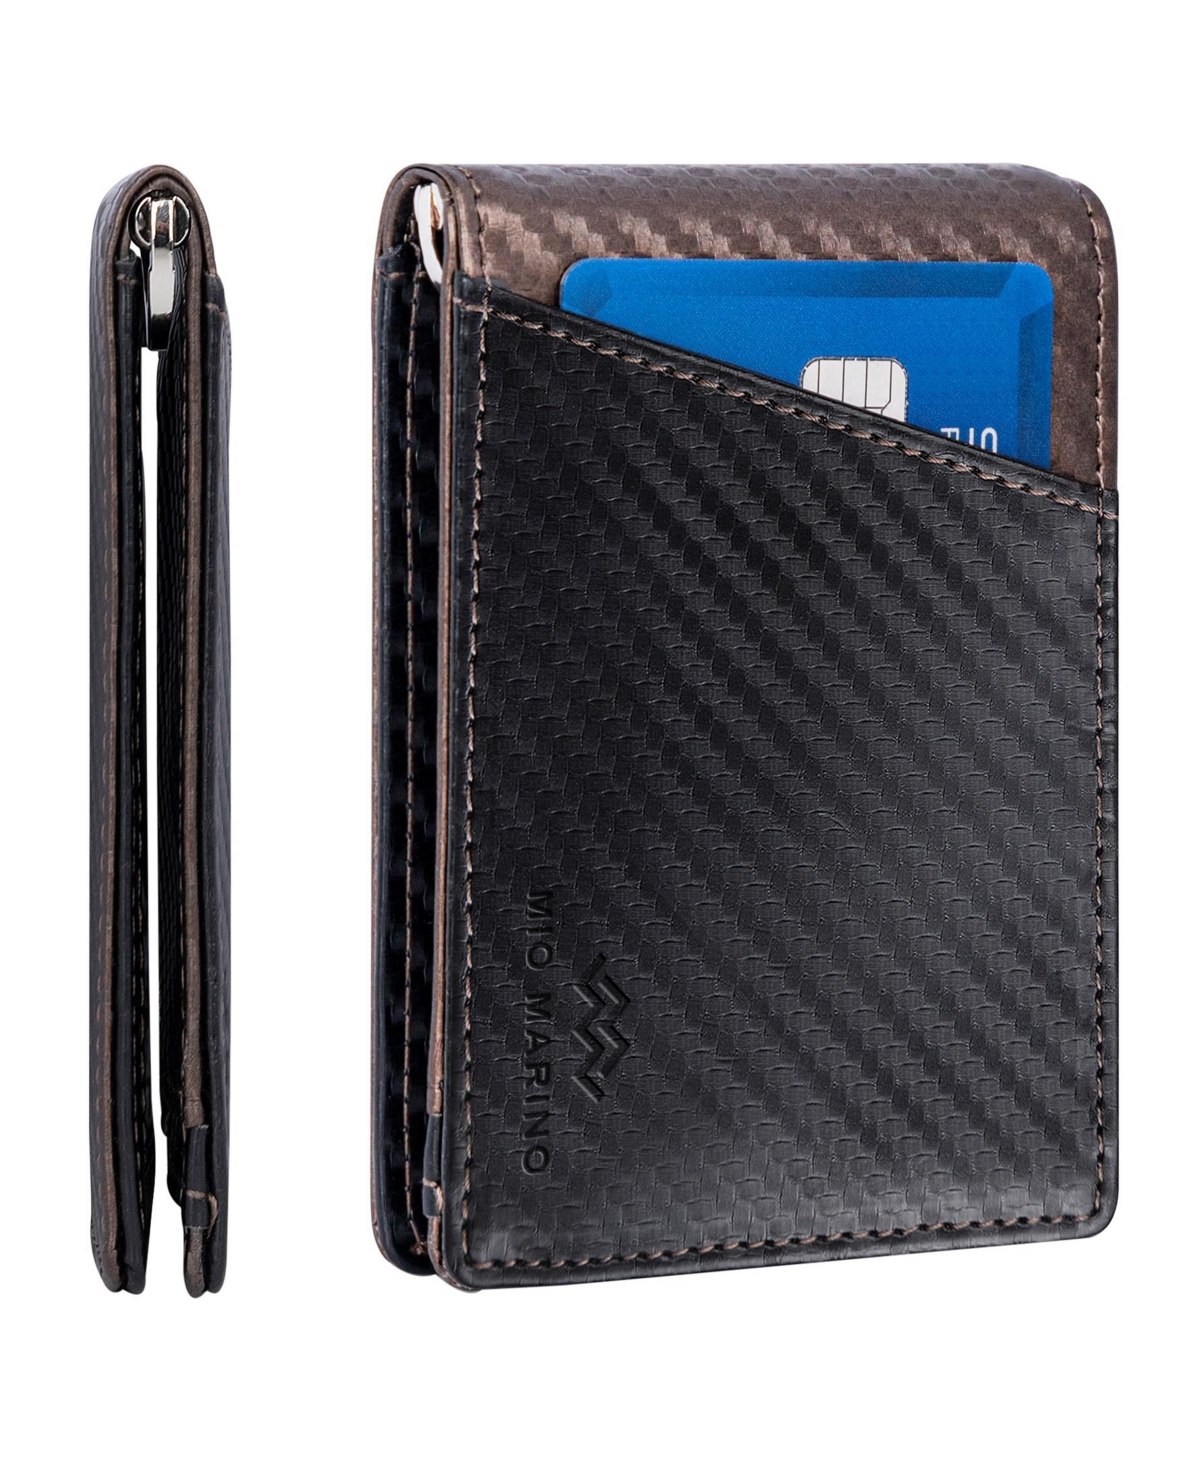 Men's Slim Bifold Wallet with Quick Access Pull Tab - Carbon black/navy